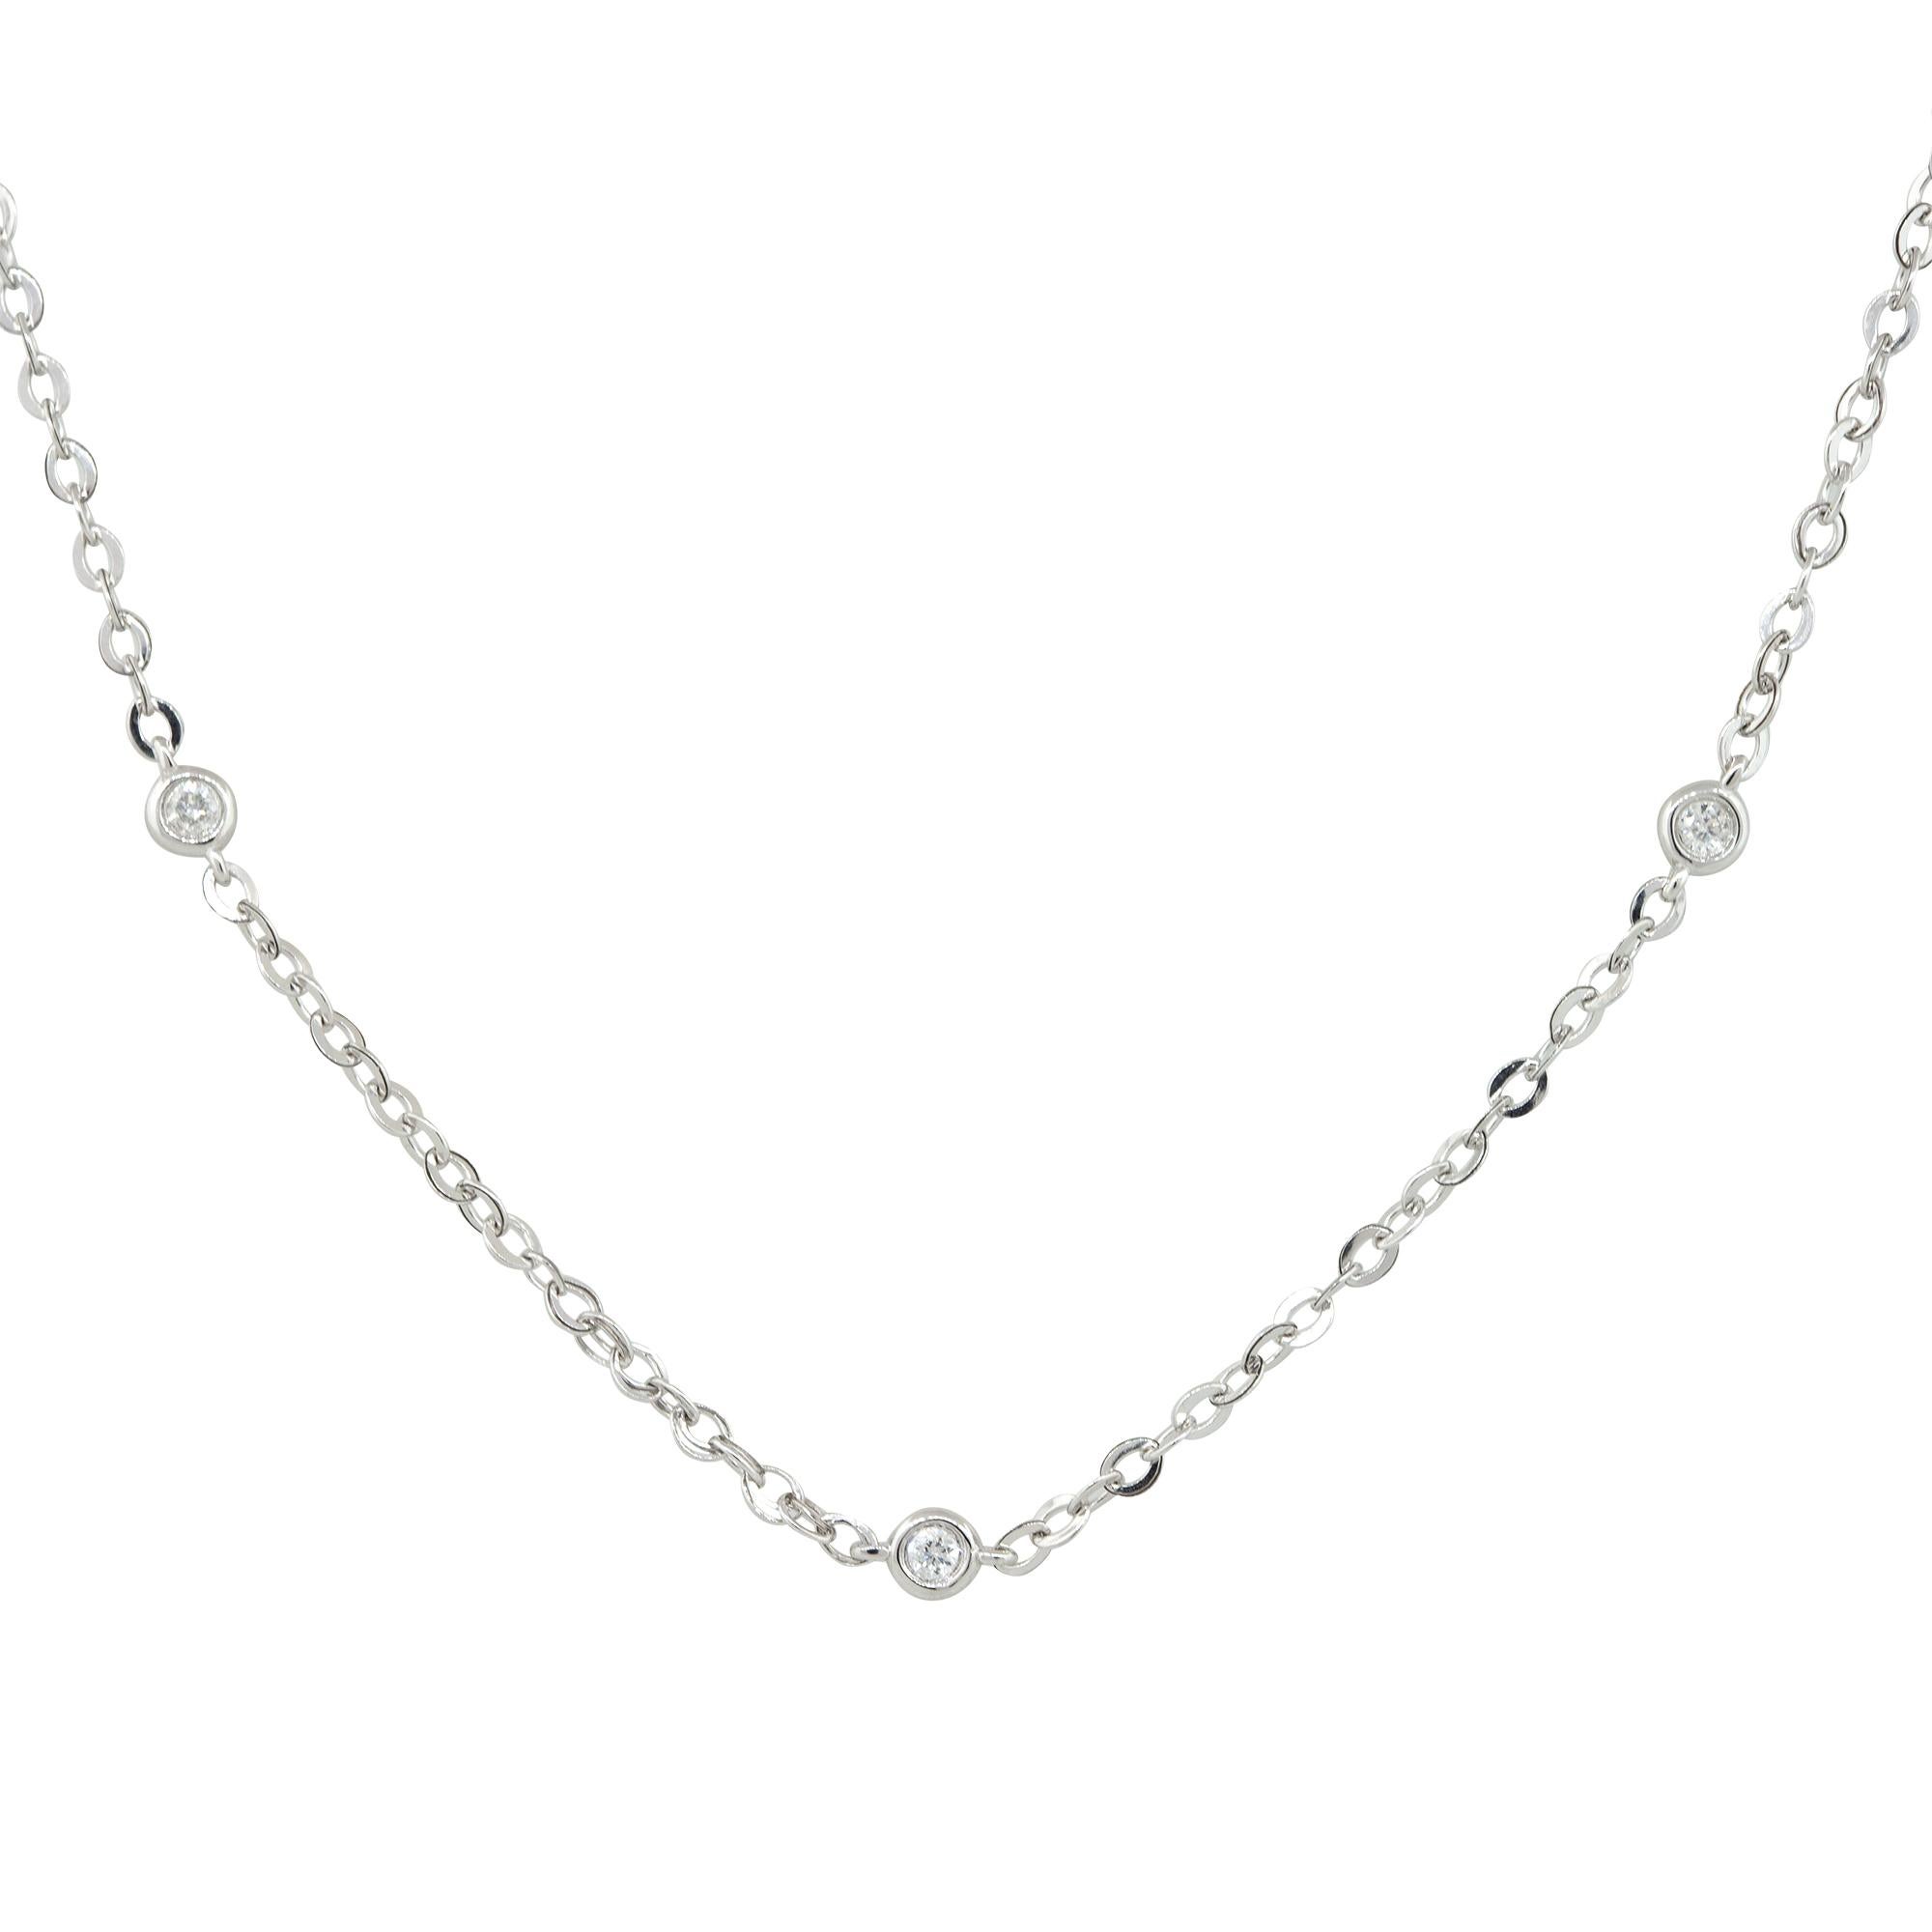 14k White Gold 0.15ctw Diamonds by the Yard Necklace
Material: 14k White Gold
Diamond Details: Approximately 0.15ctw of Round Brilliant Diamonds. There are 7, bezel set, Diamond stations spaced out along the necklace
Item Length: Adjustable from